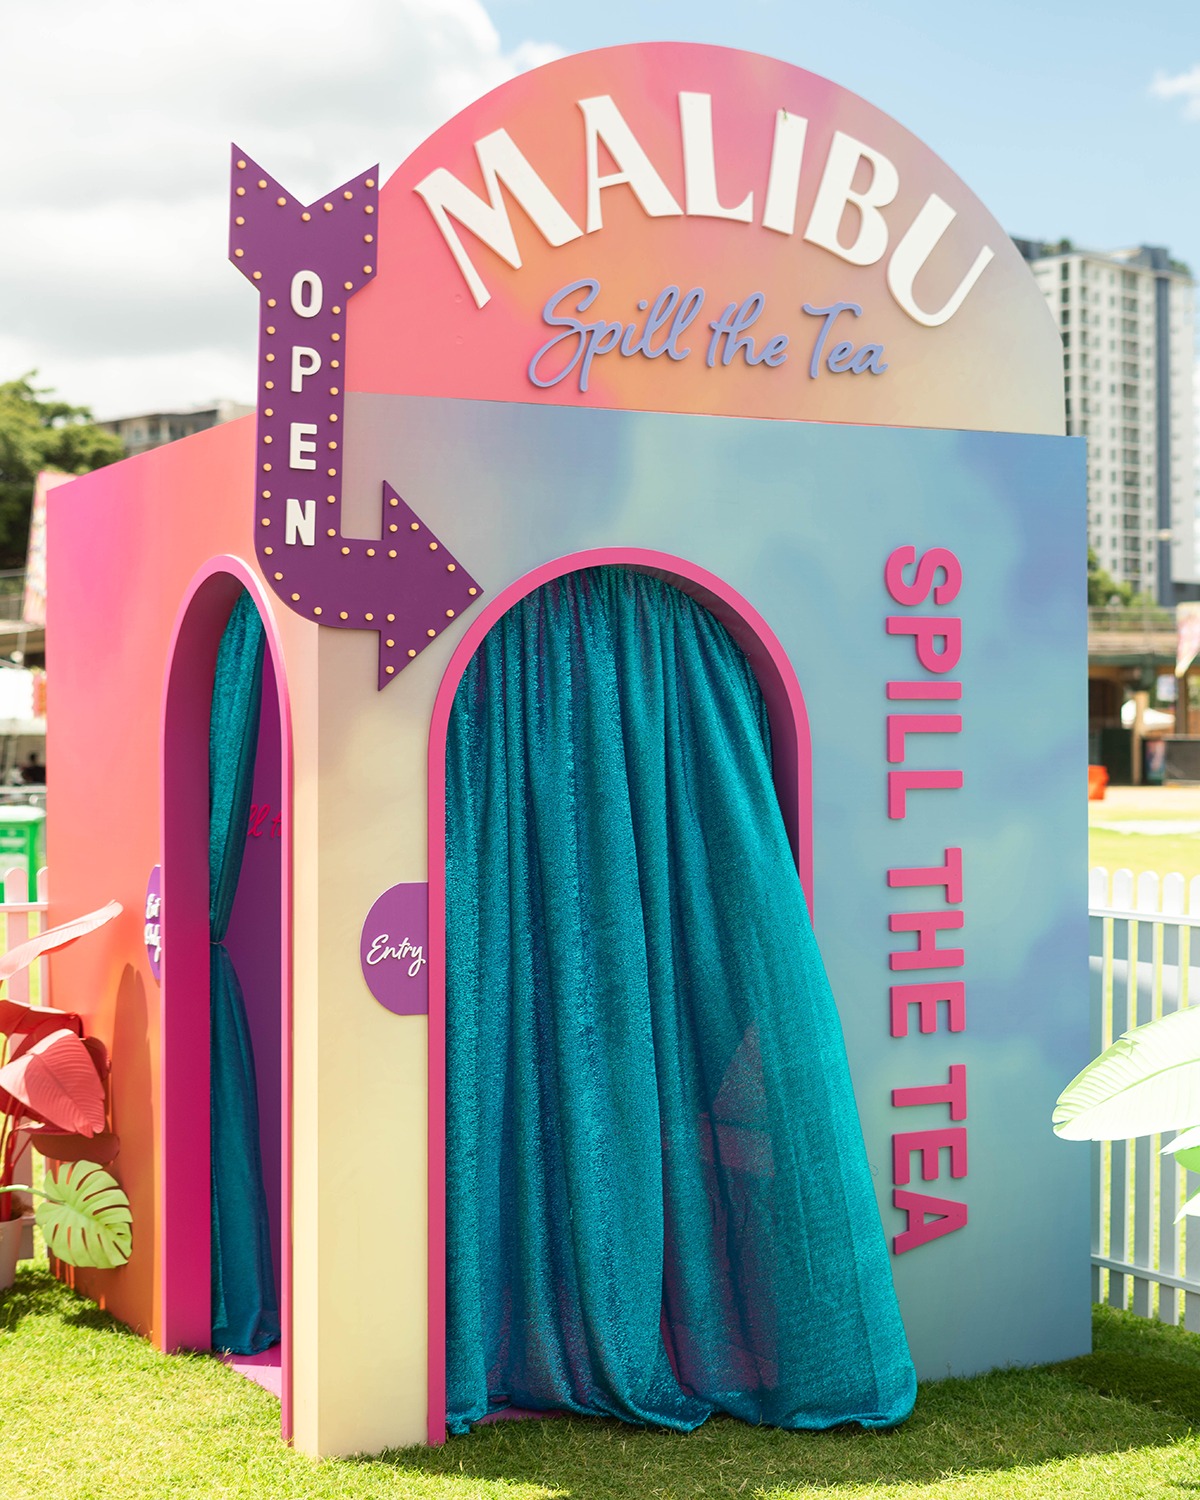 Malibu Set at Laneway Festival. A Colourful Booth Called 'Spill the Tea'.